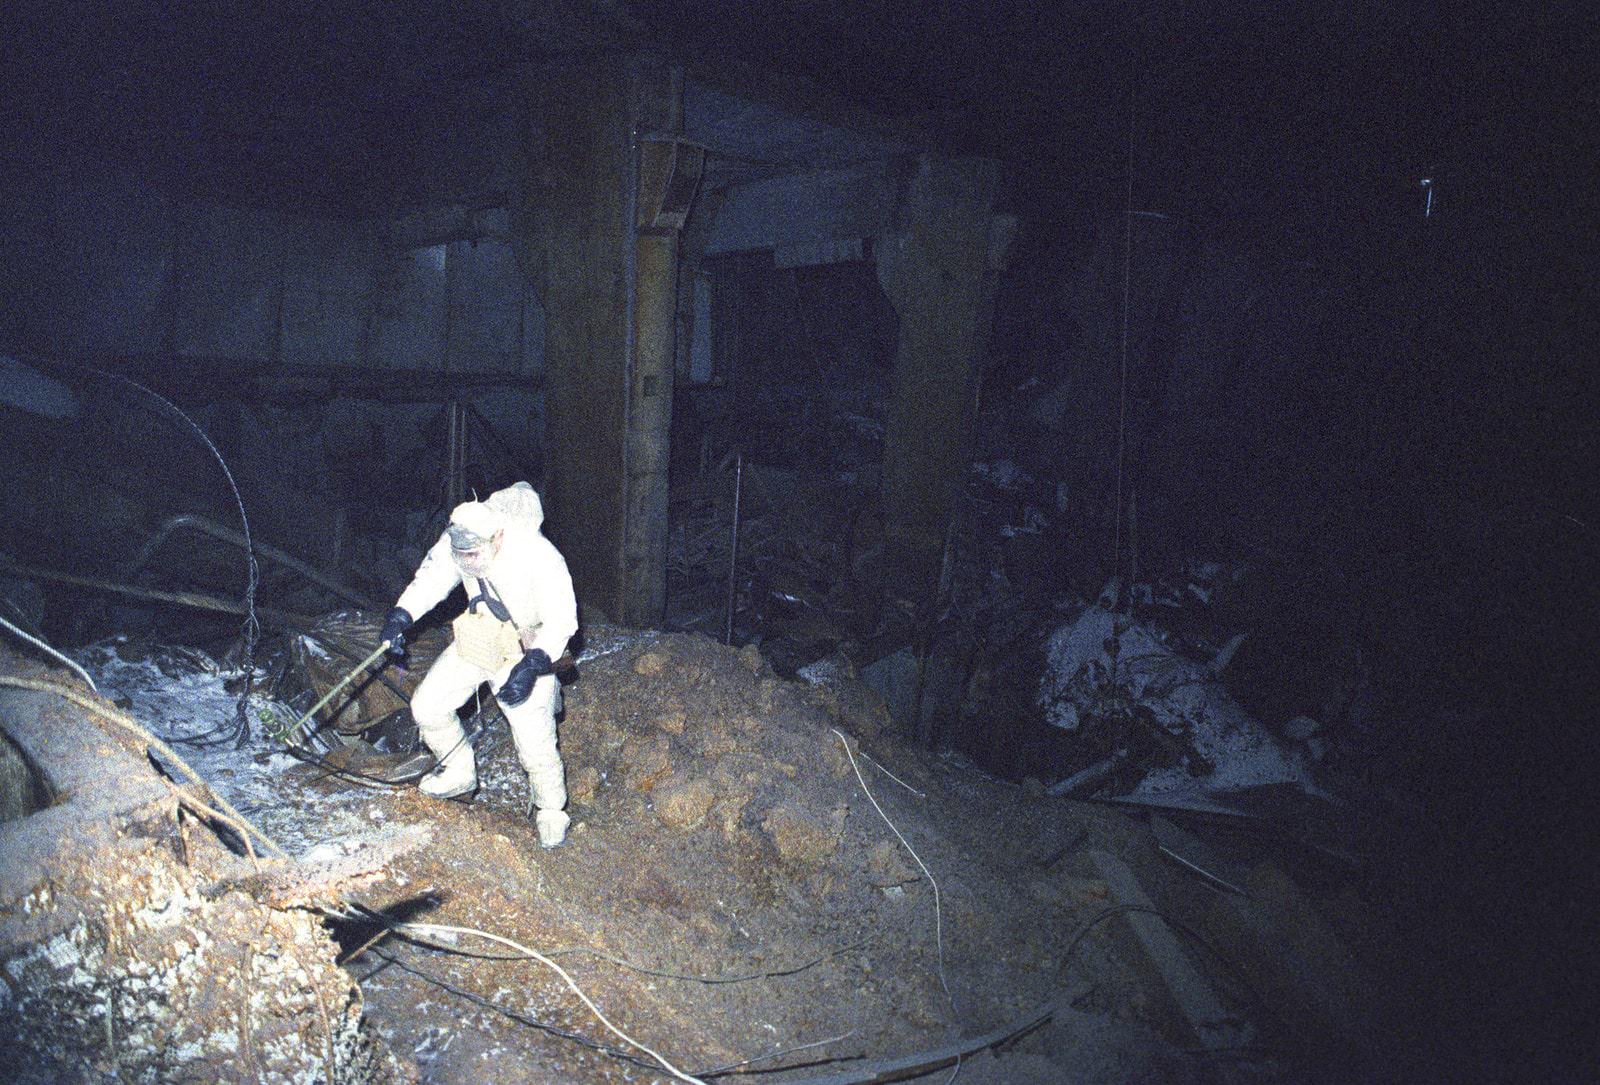 A lone scientist descending into the radioactive darkness of Chernobyl in 1986